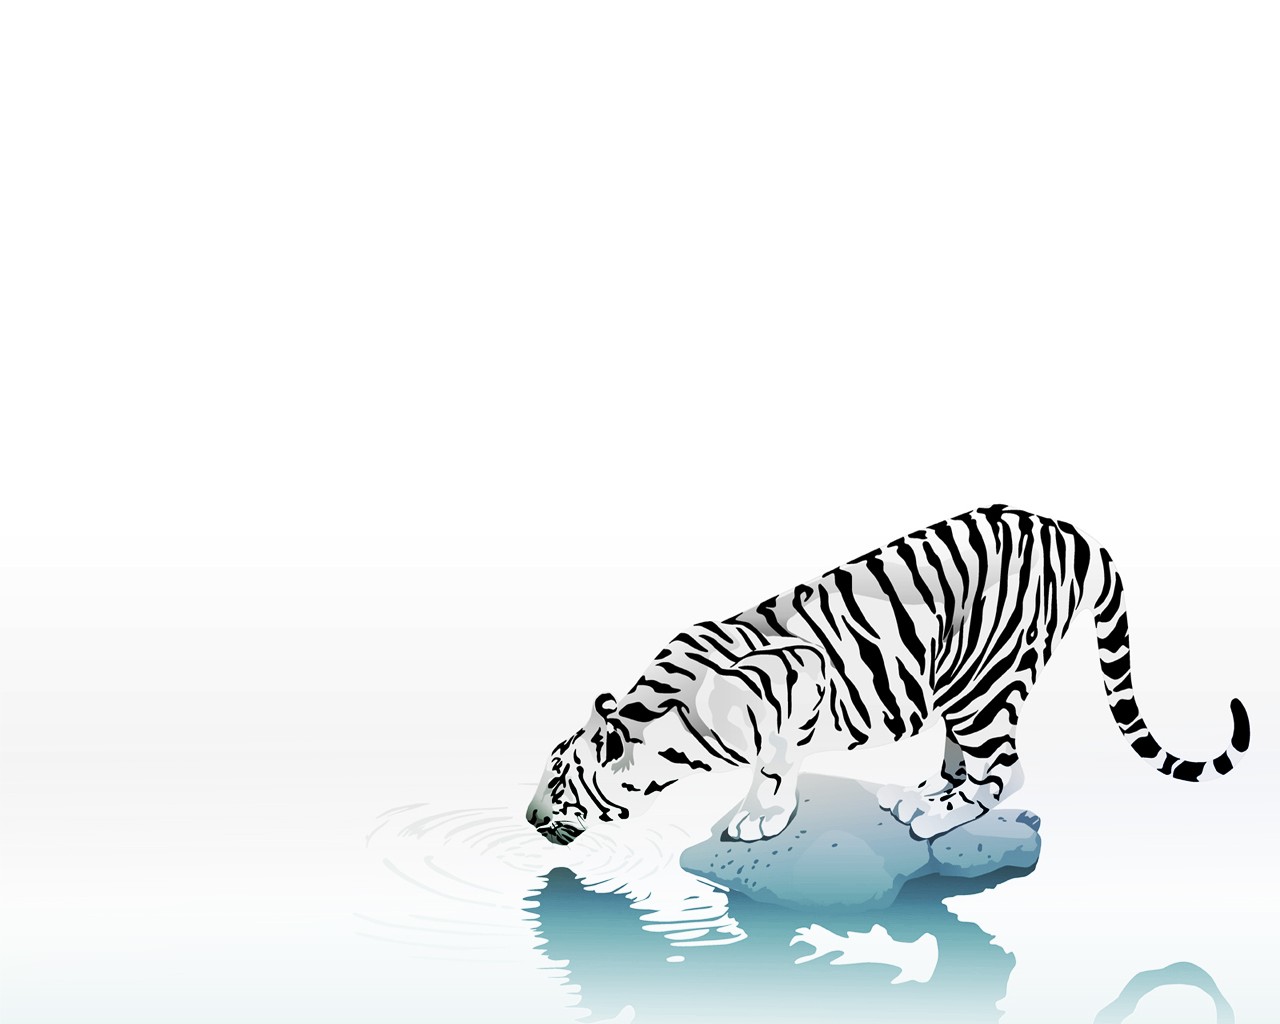 General 1280x1024 tiger white background animals simple background